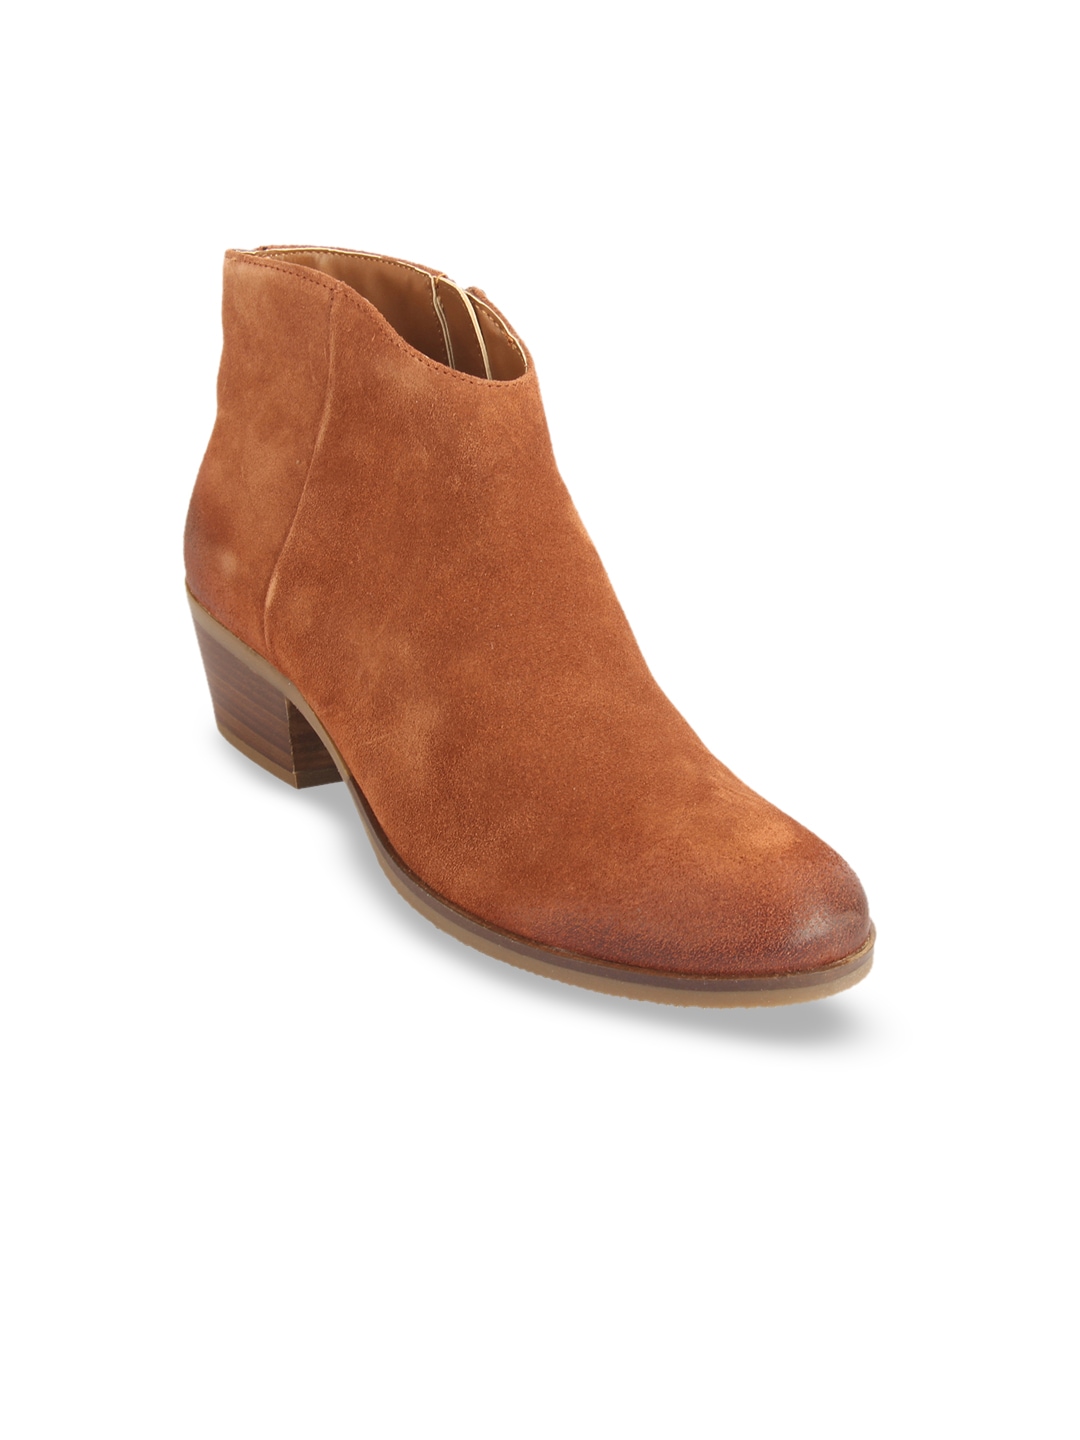 Clarks Women Tan Brown Solid Mid-Top Heeled Suede Boots Price in India